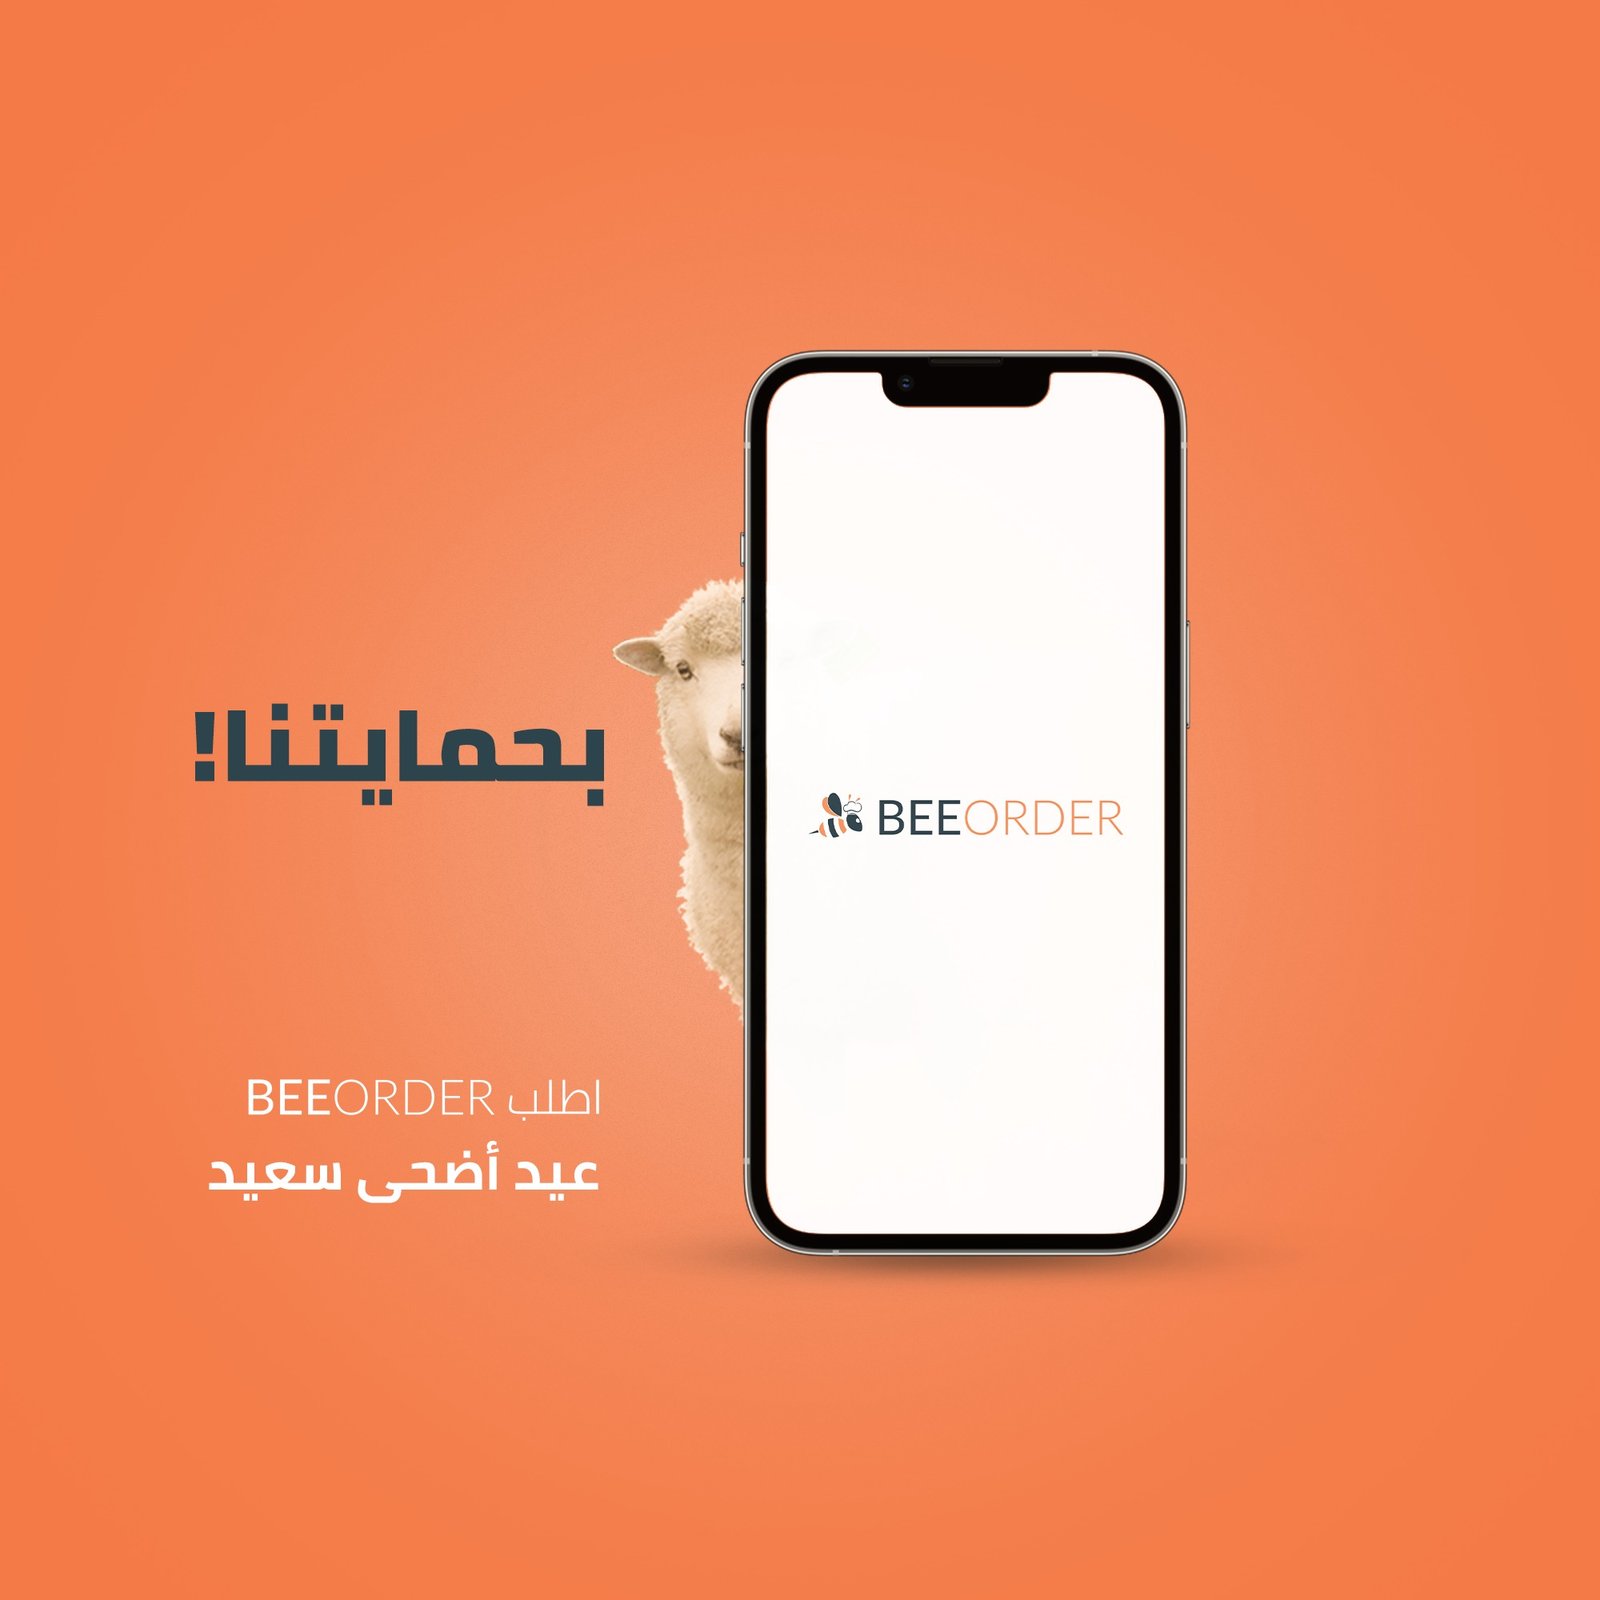 BeeOrder Creative Ads Concept